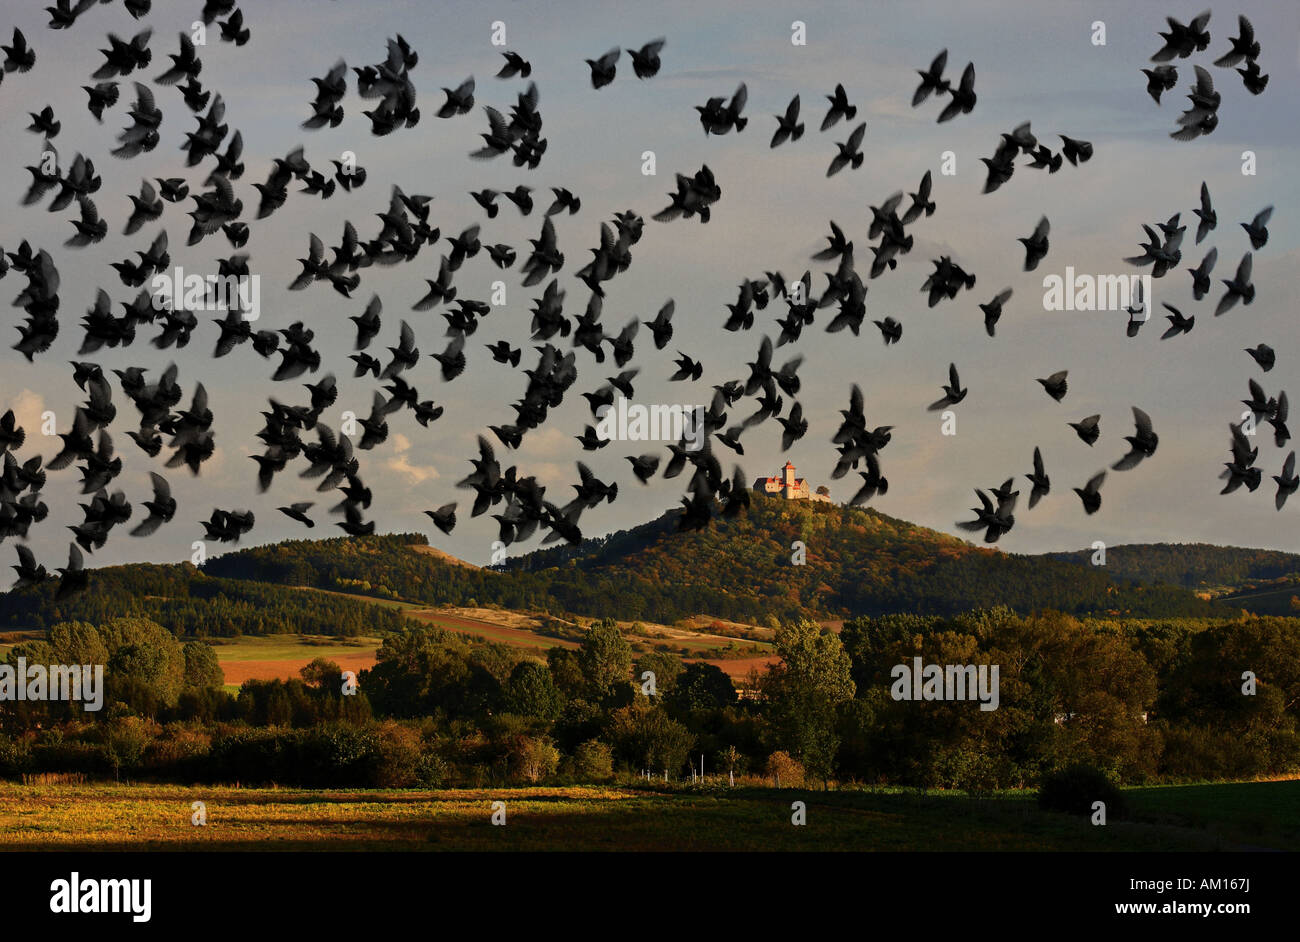 Migratory birds, european starlings, fly in front of Wachsenburg, Thuringia, germany Stock Photo